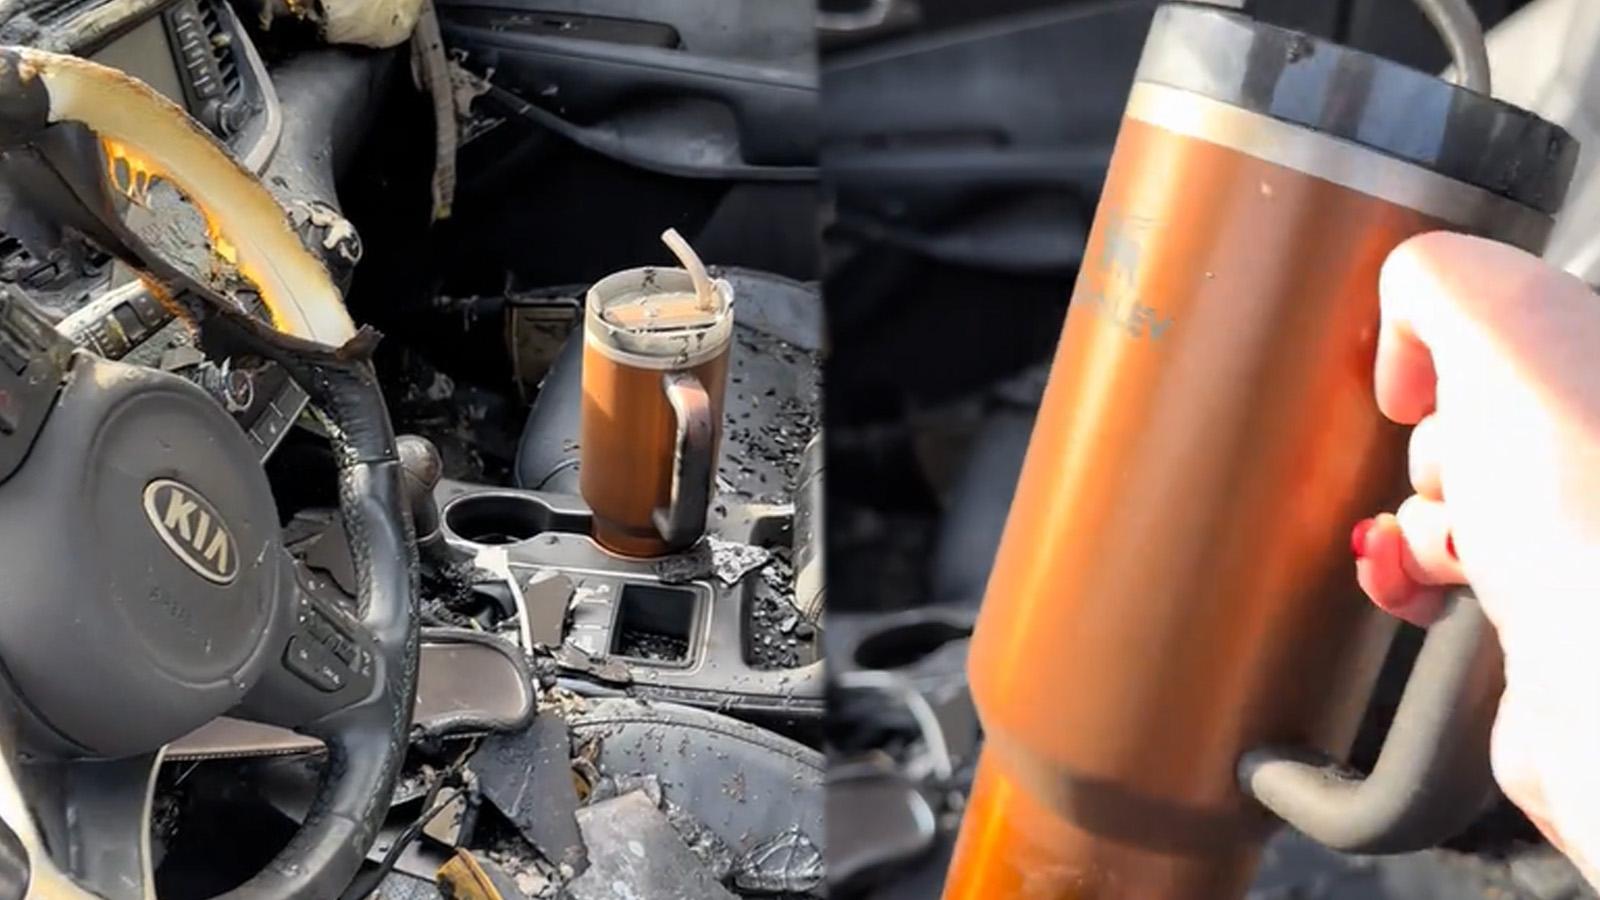 Stanley offers to replace woman's car after fire leaves brand's tumbler  untouched - Dexerto